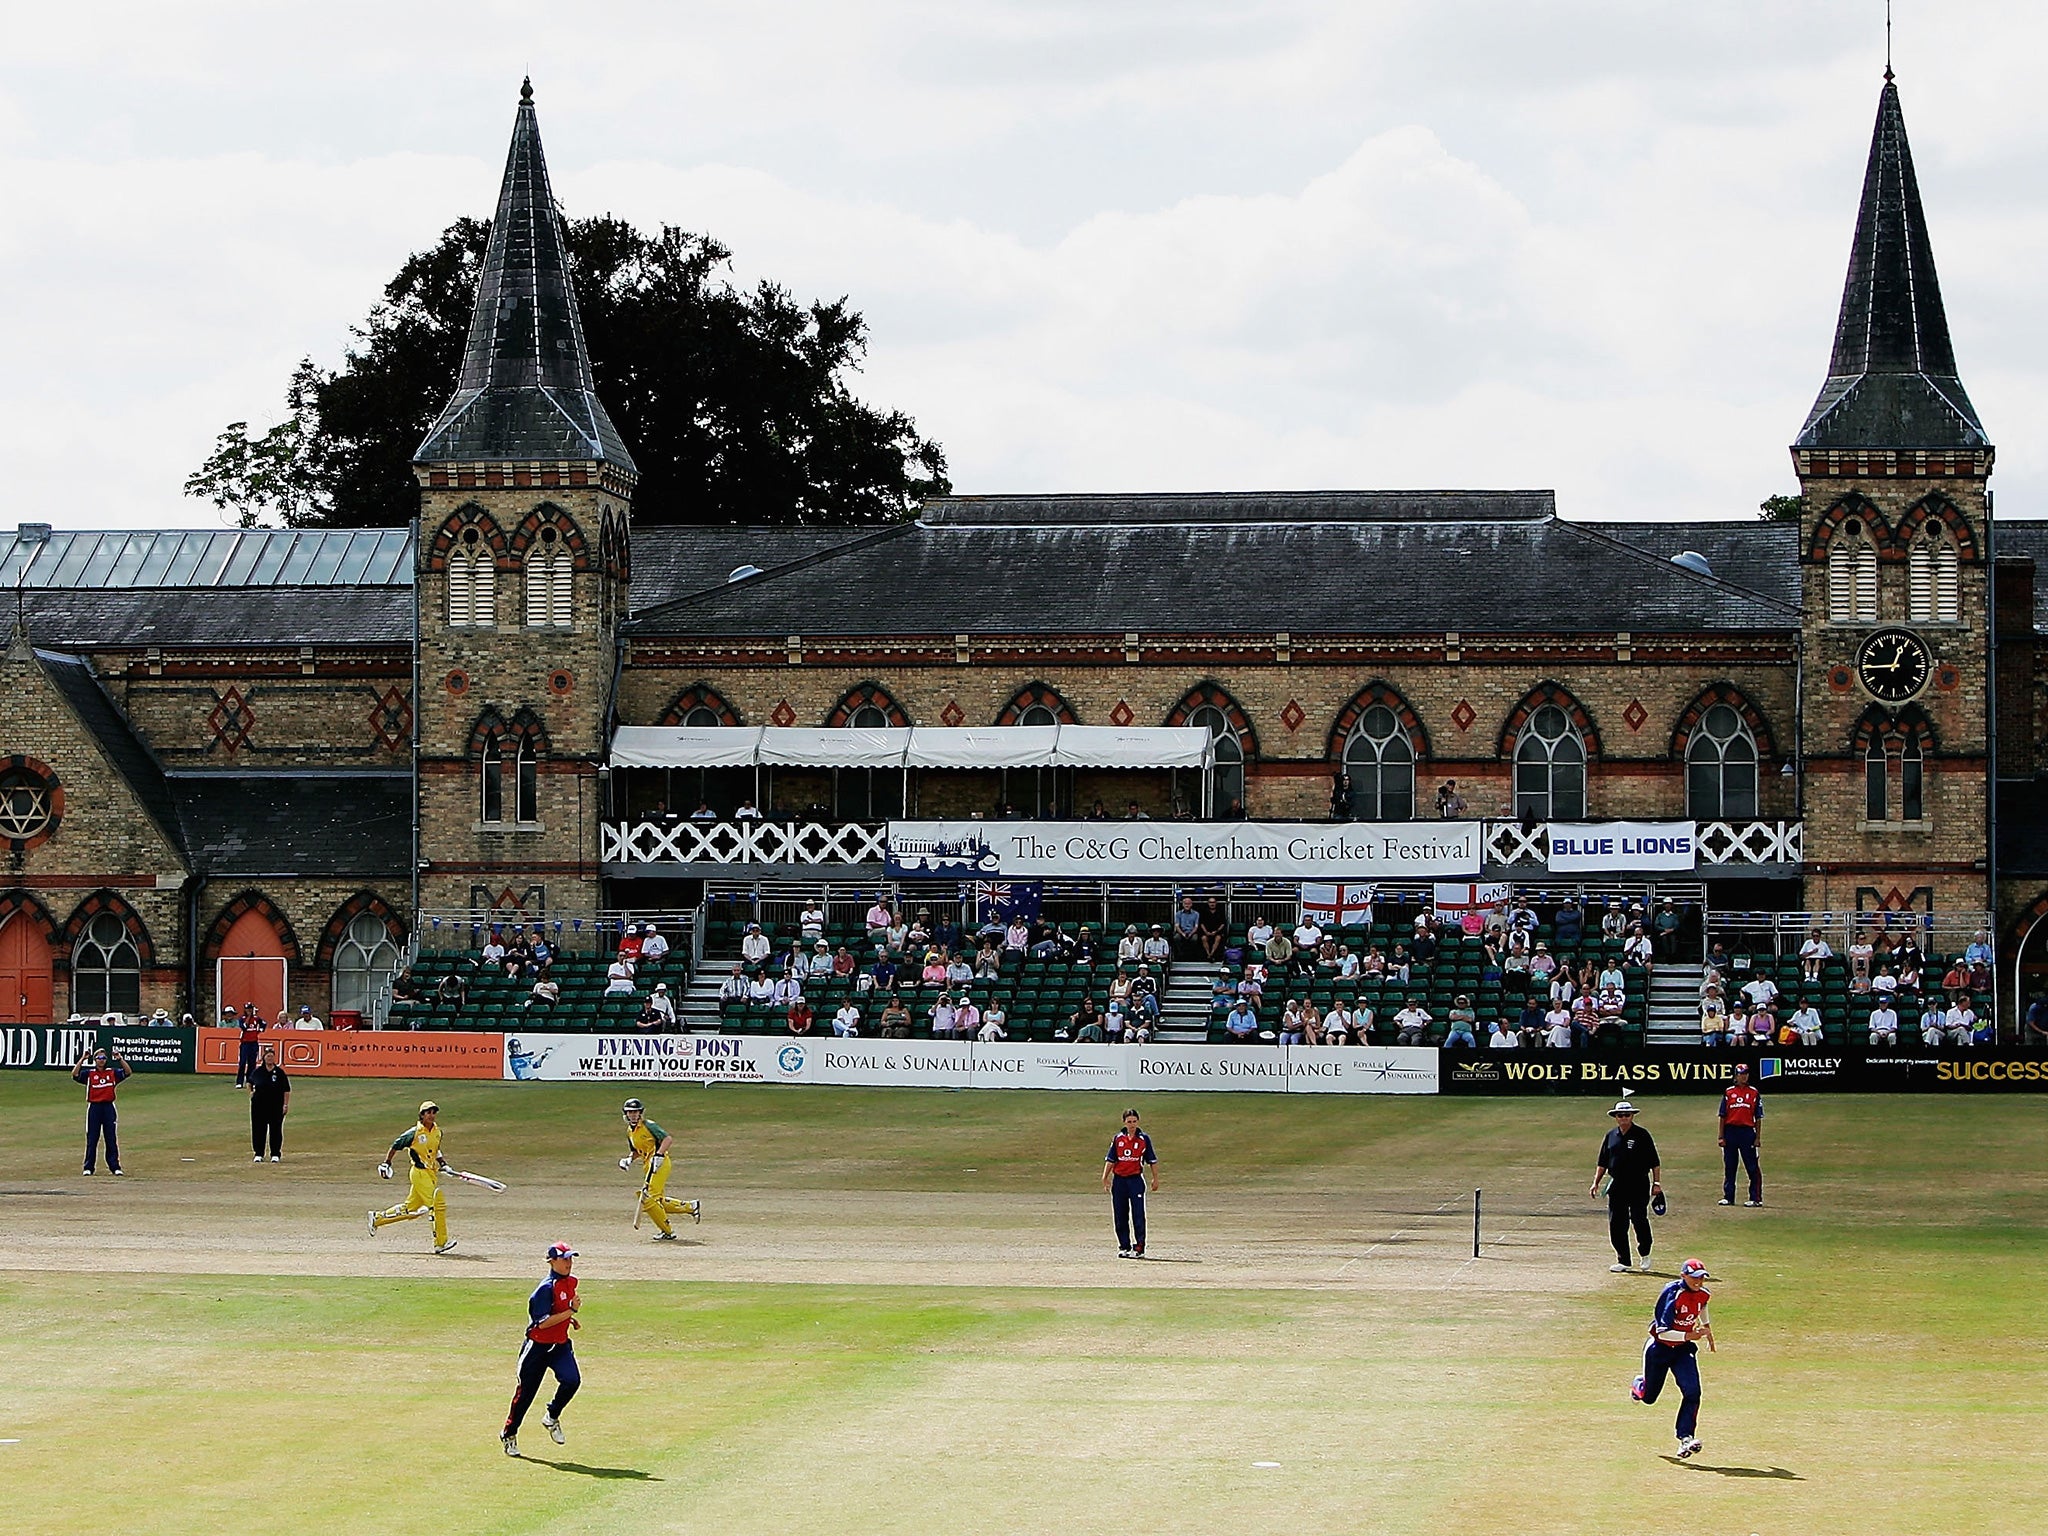 Cheltenham College provides one of the nation's most stunning backdrops to watch the County game